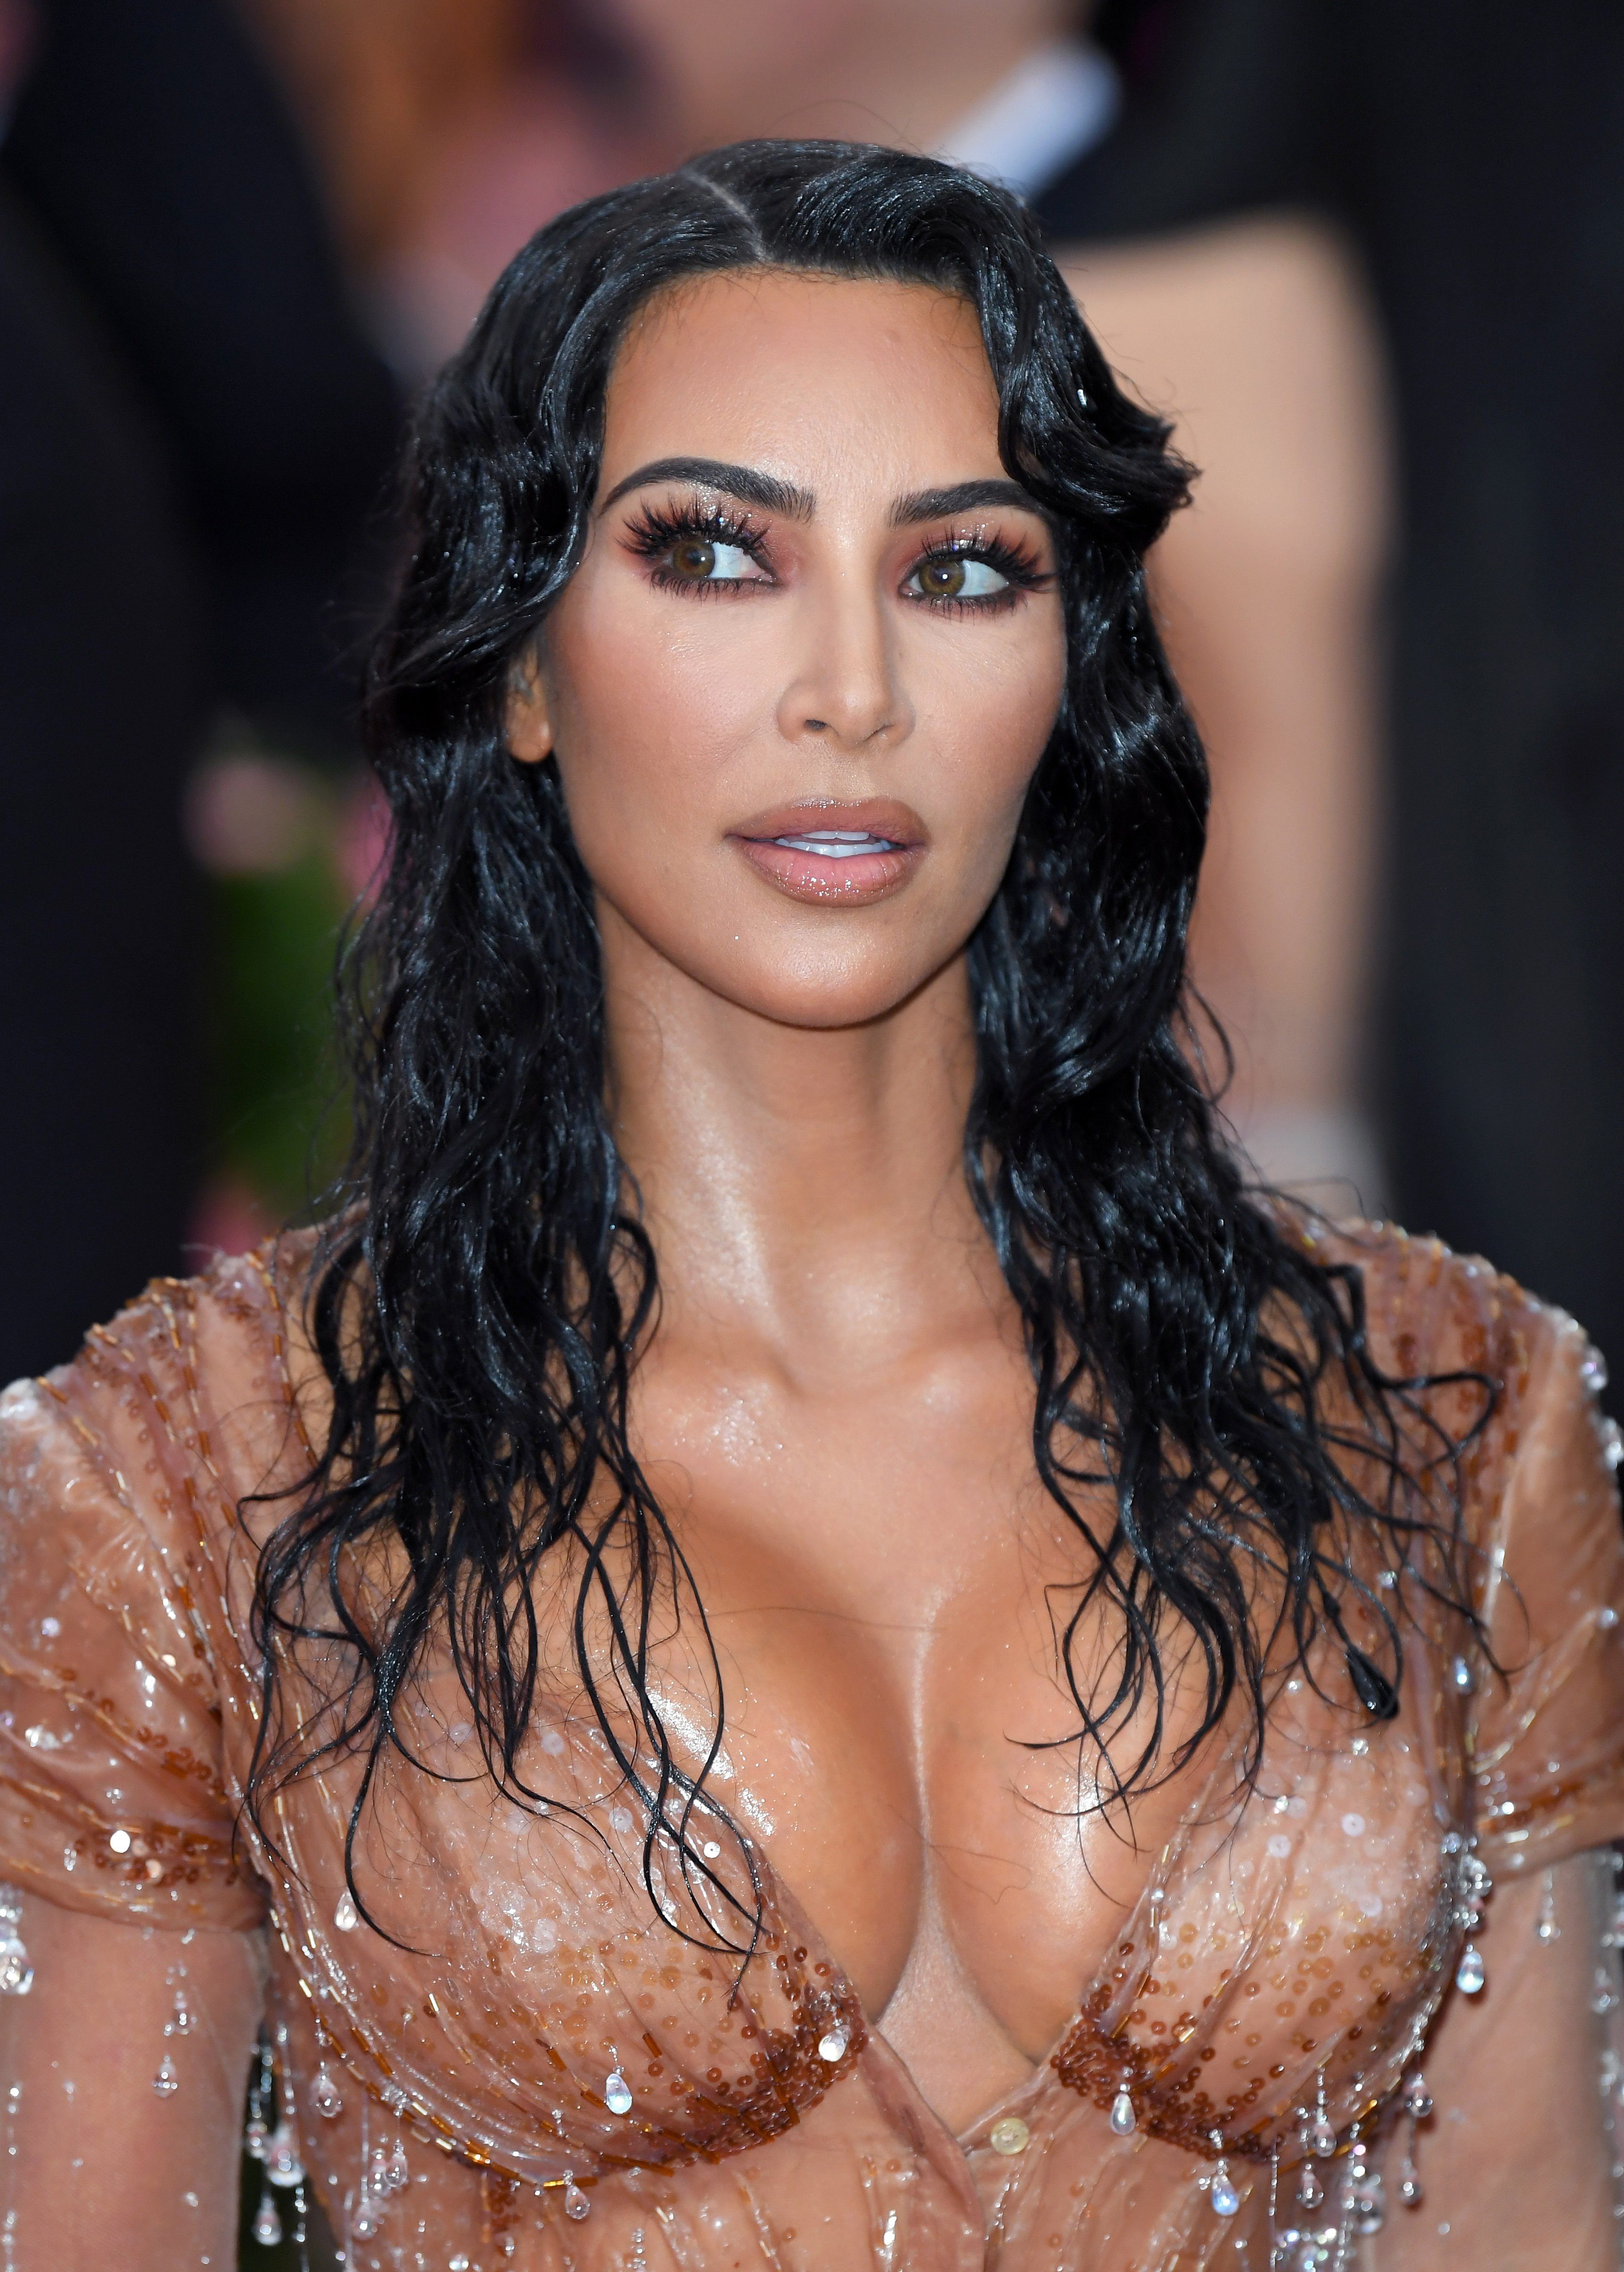 Kim Kardashian West attends the 2019 Met Gala in New York City on May 6, 2019 | Photo: Getty Images